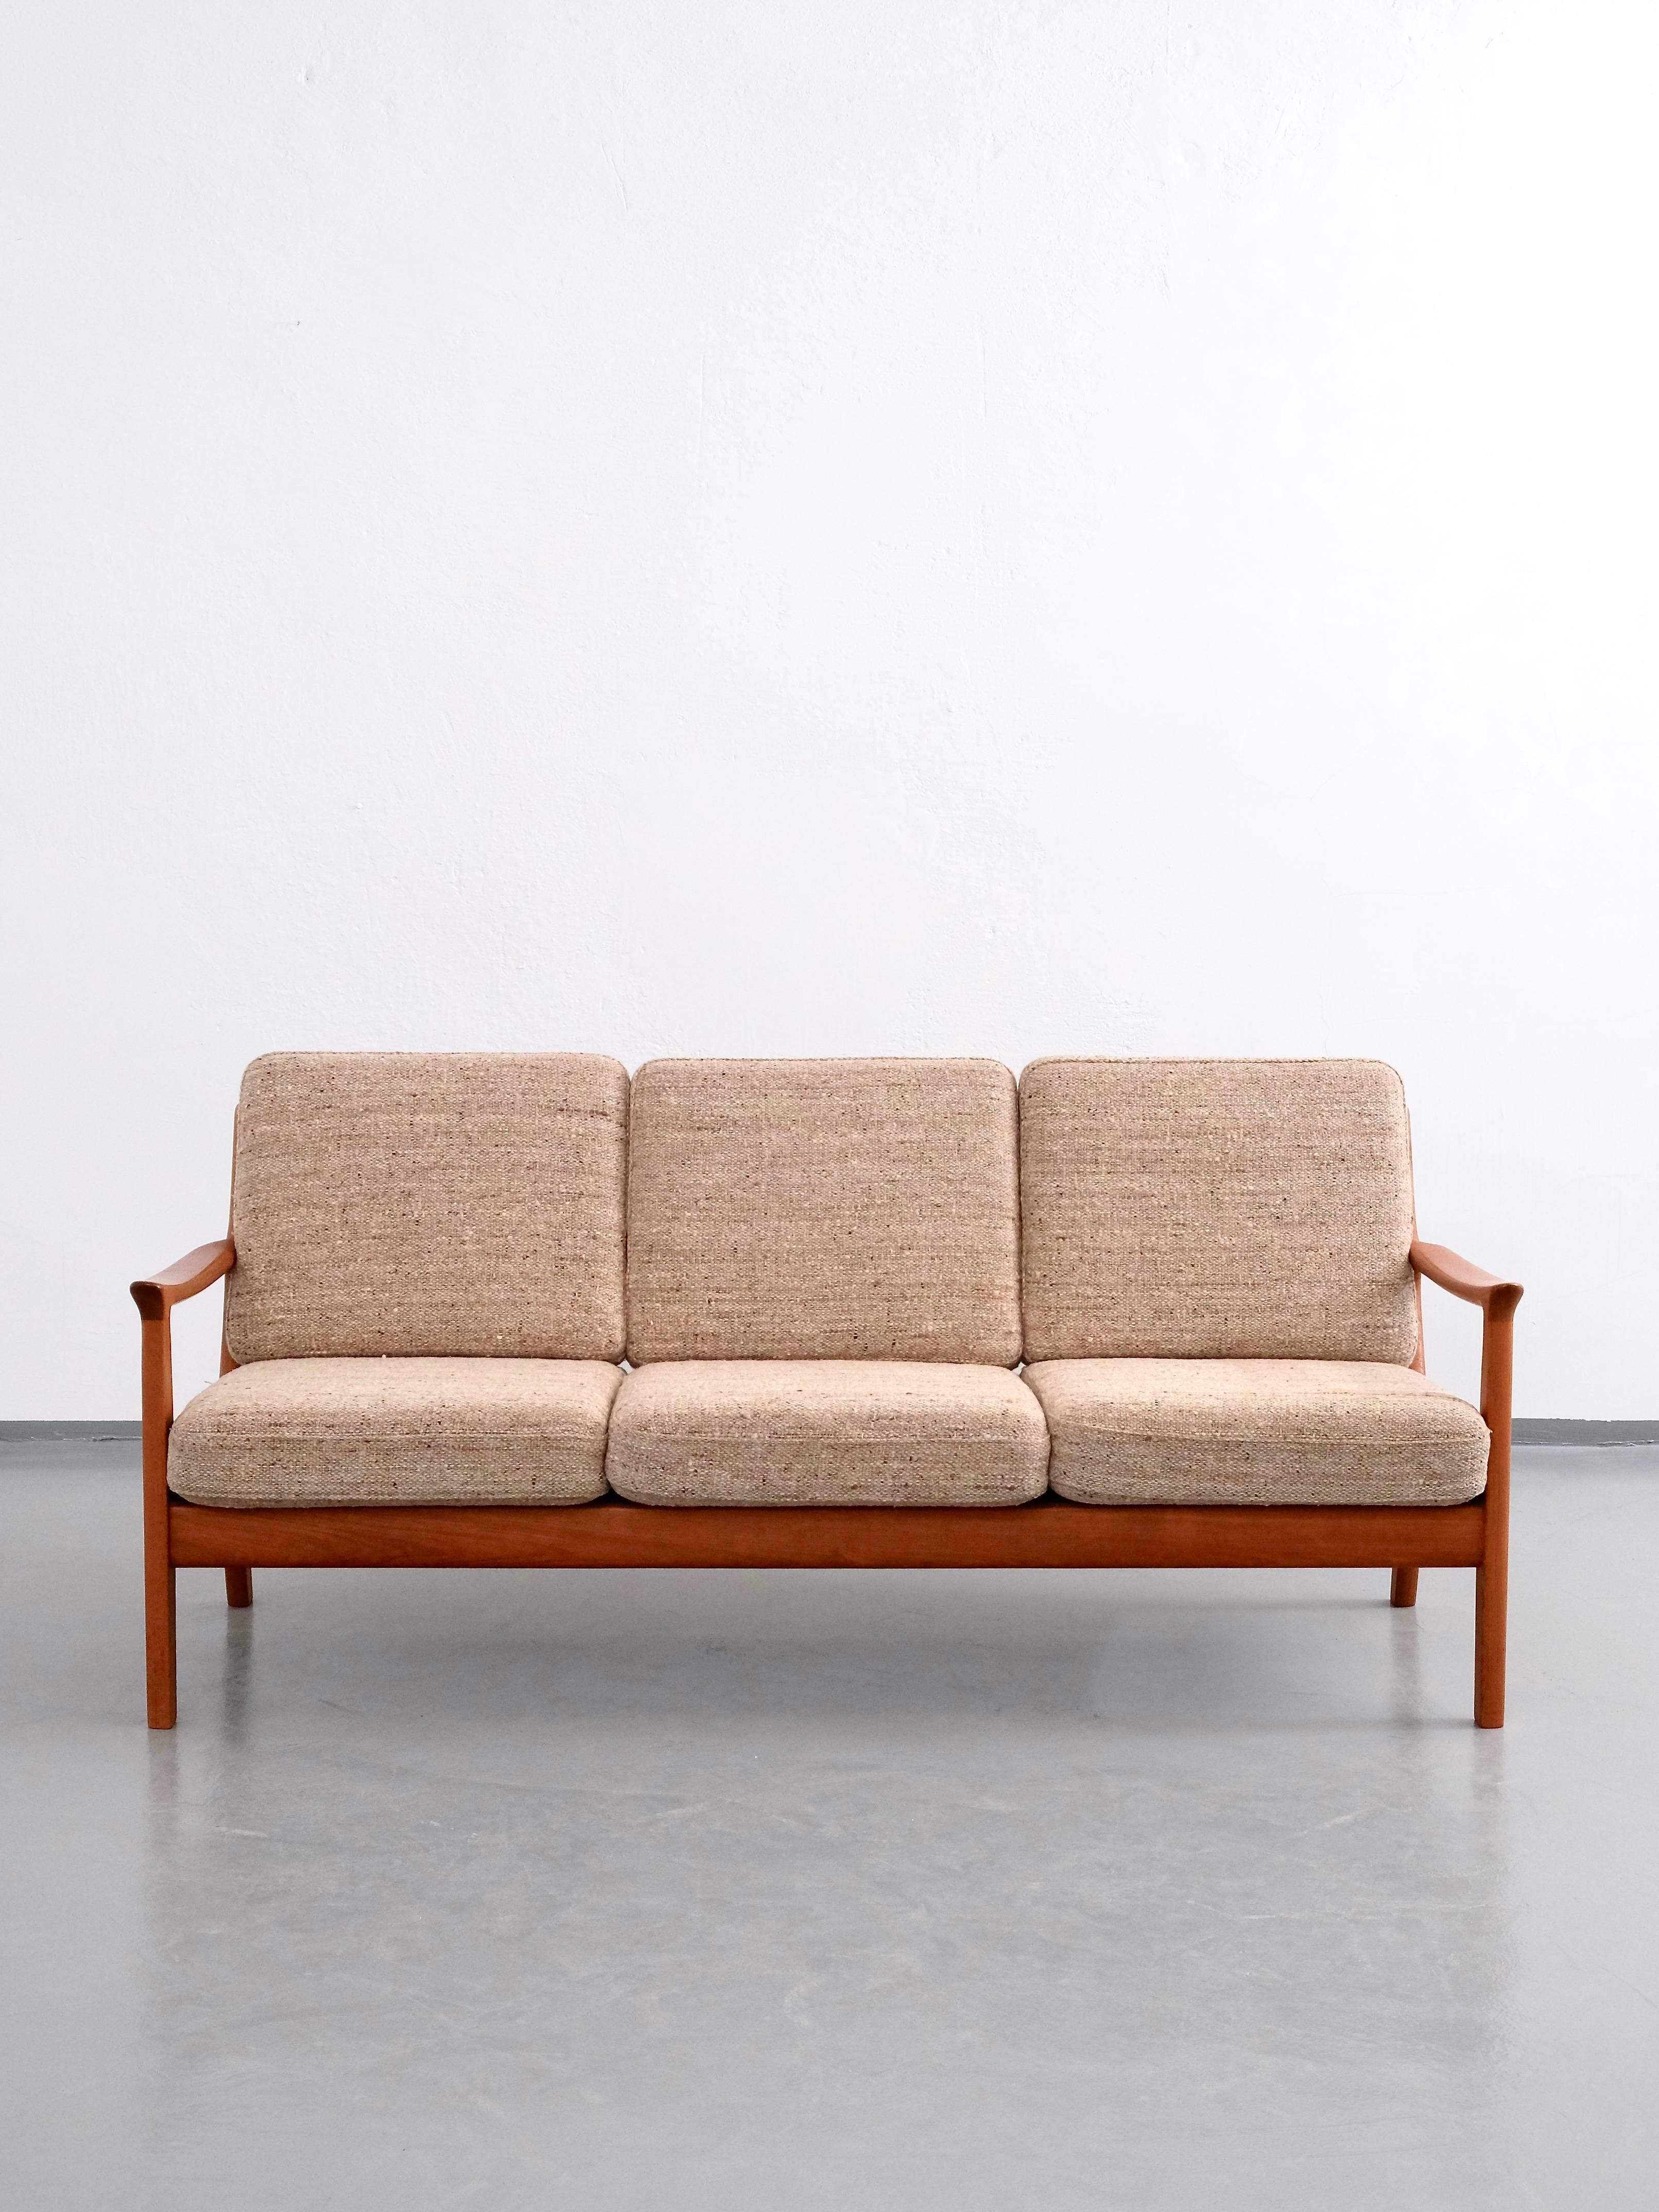 Three-seat sofa by Juul Kristensen from the 1960s. Structure in teak and removable cushions with original wool upholstery. Stamped 